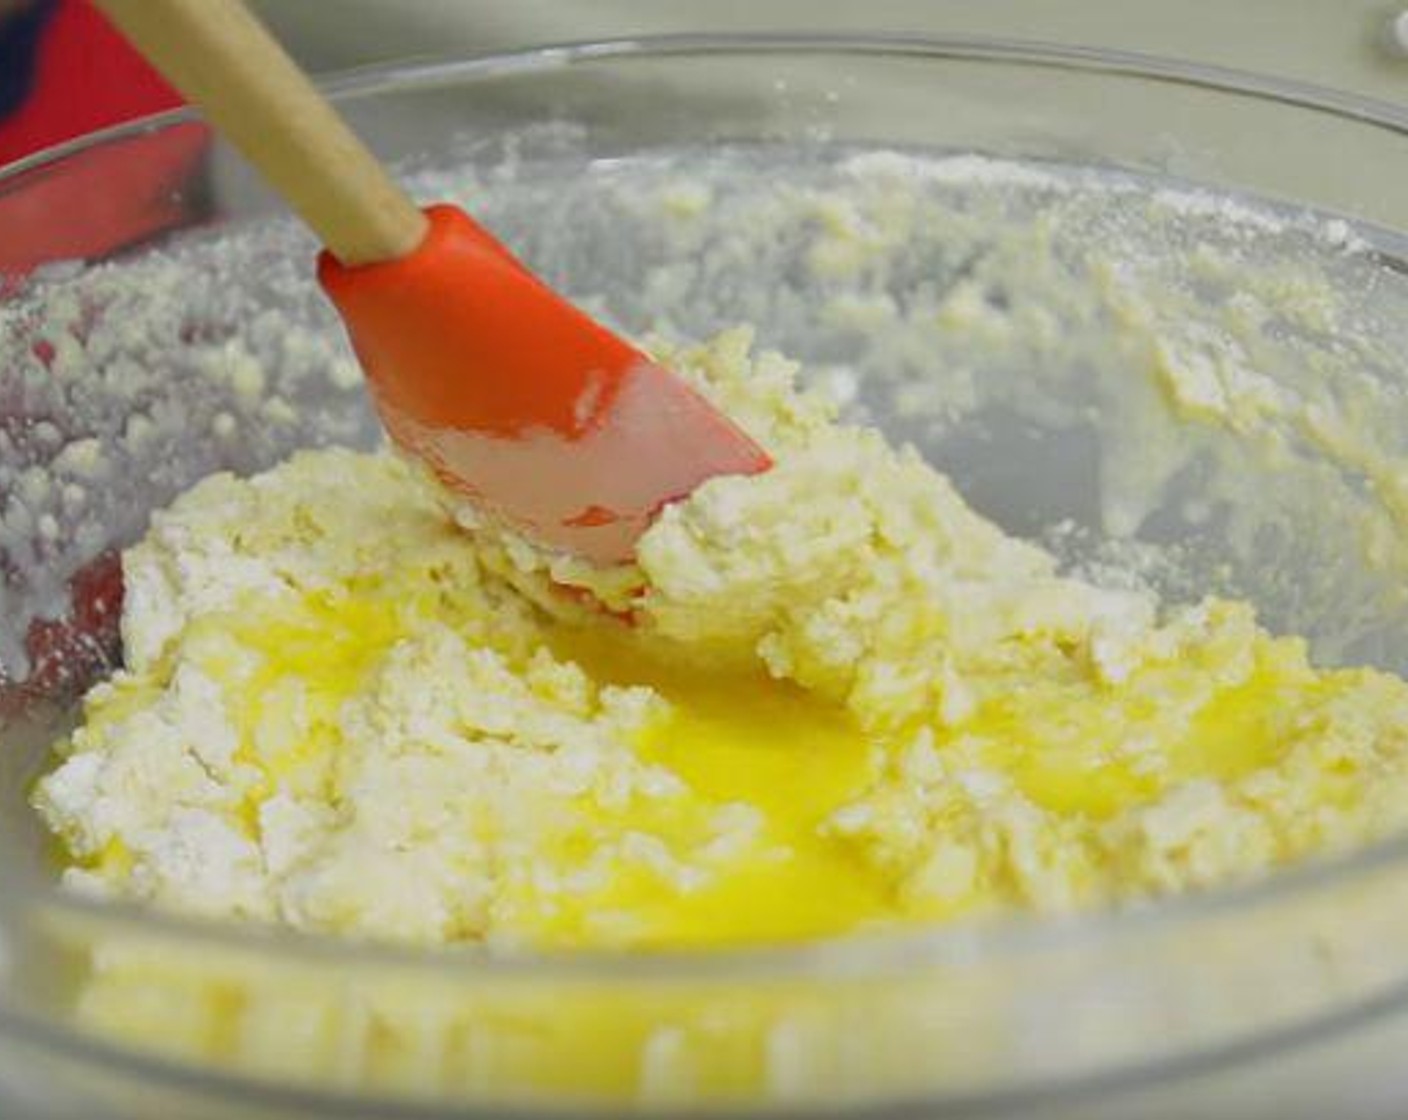 step 2 In a jug, whisk Milk (1 cup) and Farmhouse Eggs® Large Brown Egg (1) together. Add milk mixture to the flour mixture and mix until the combination is nearly combined, then stir in the Butter (1/4 cup).